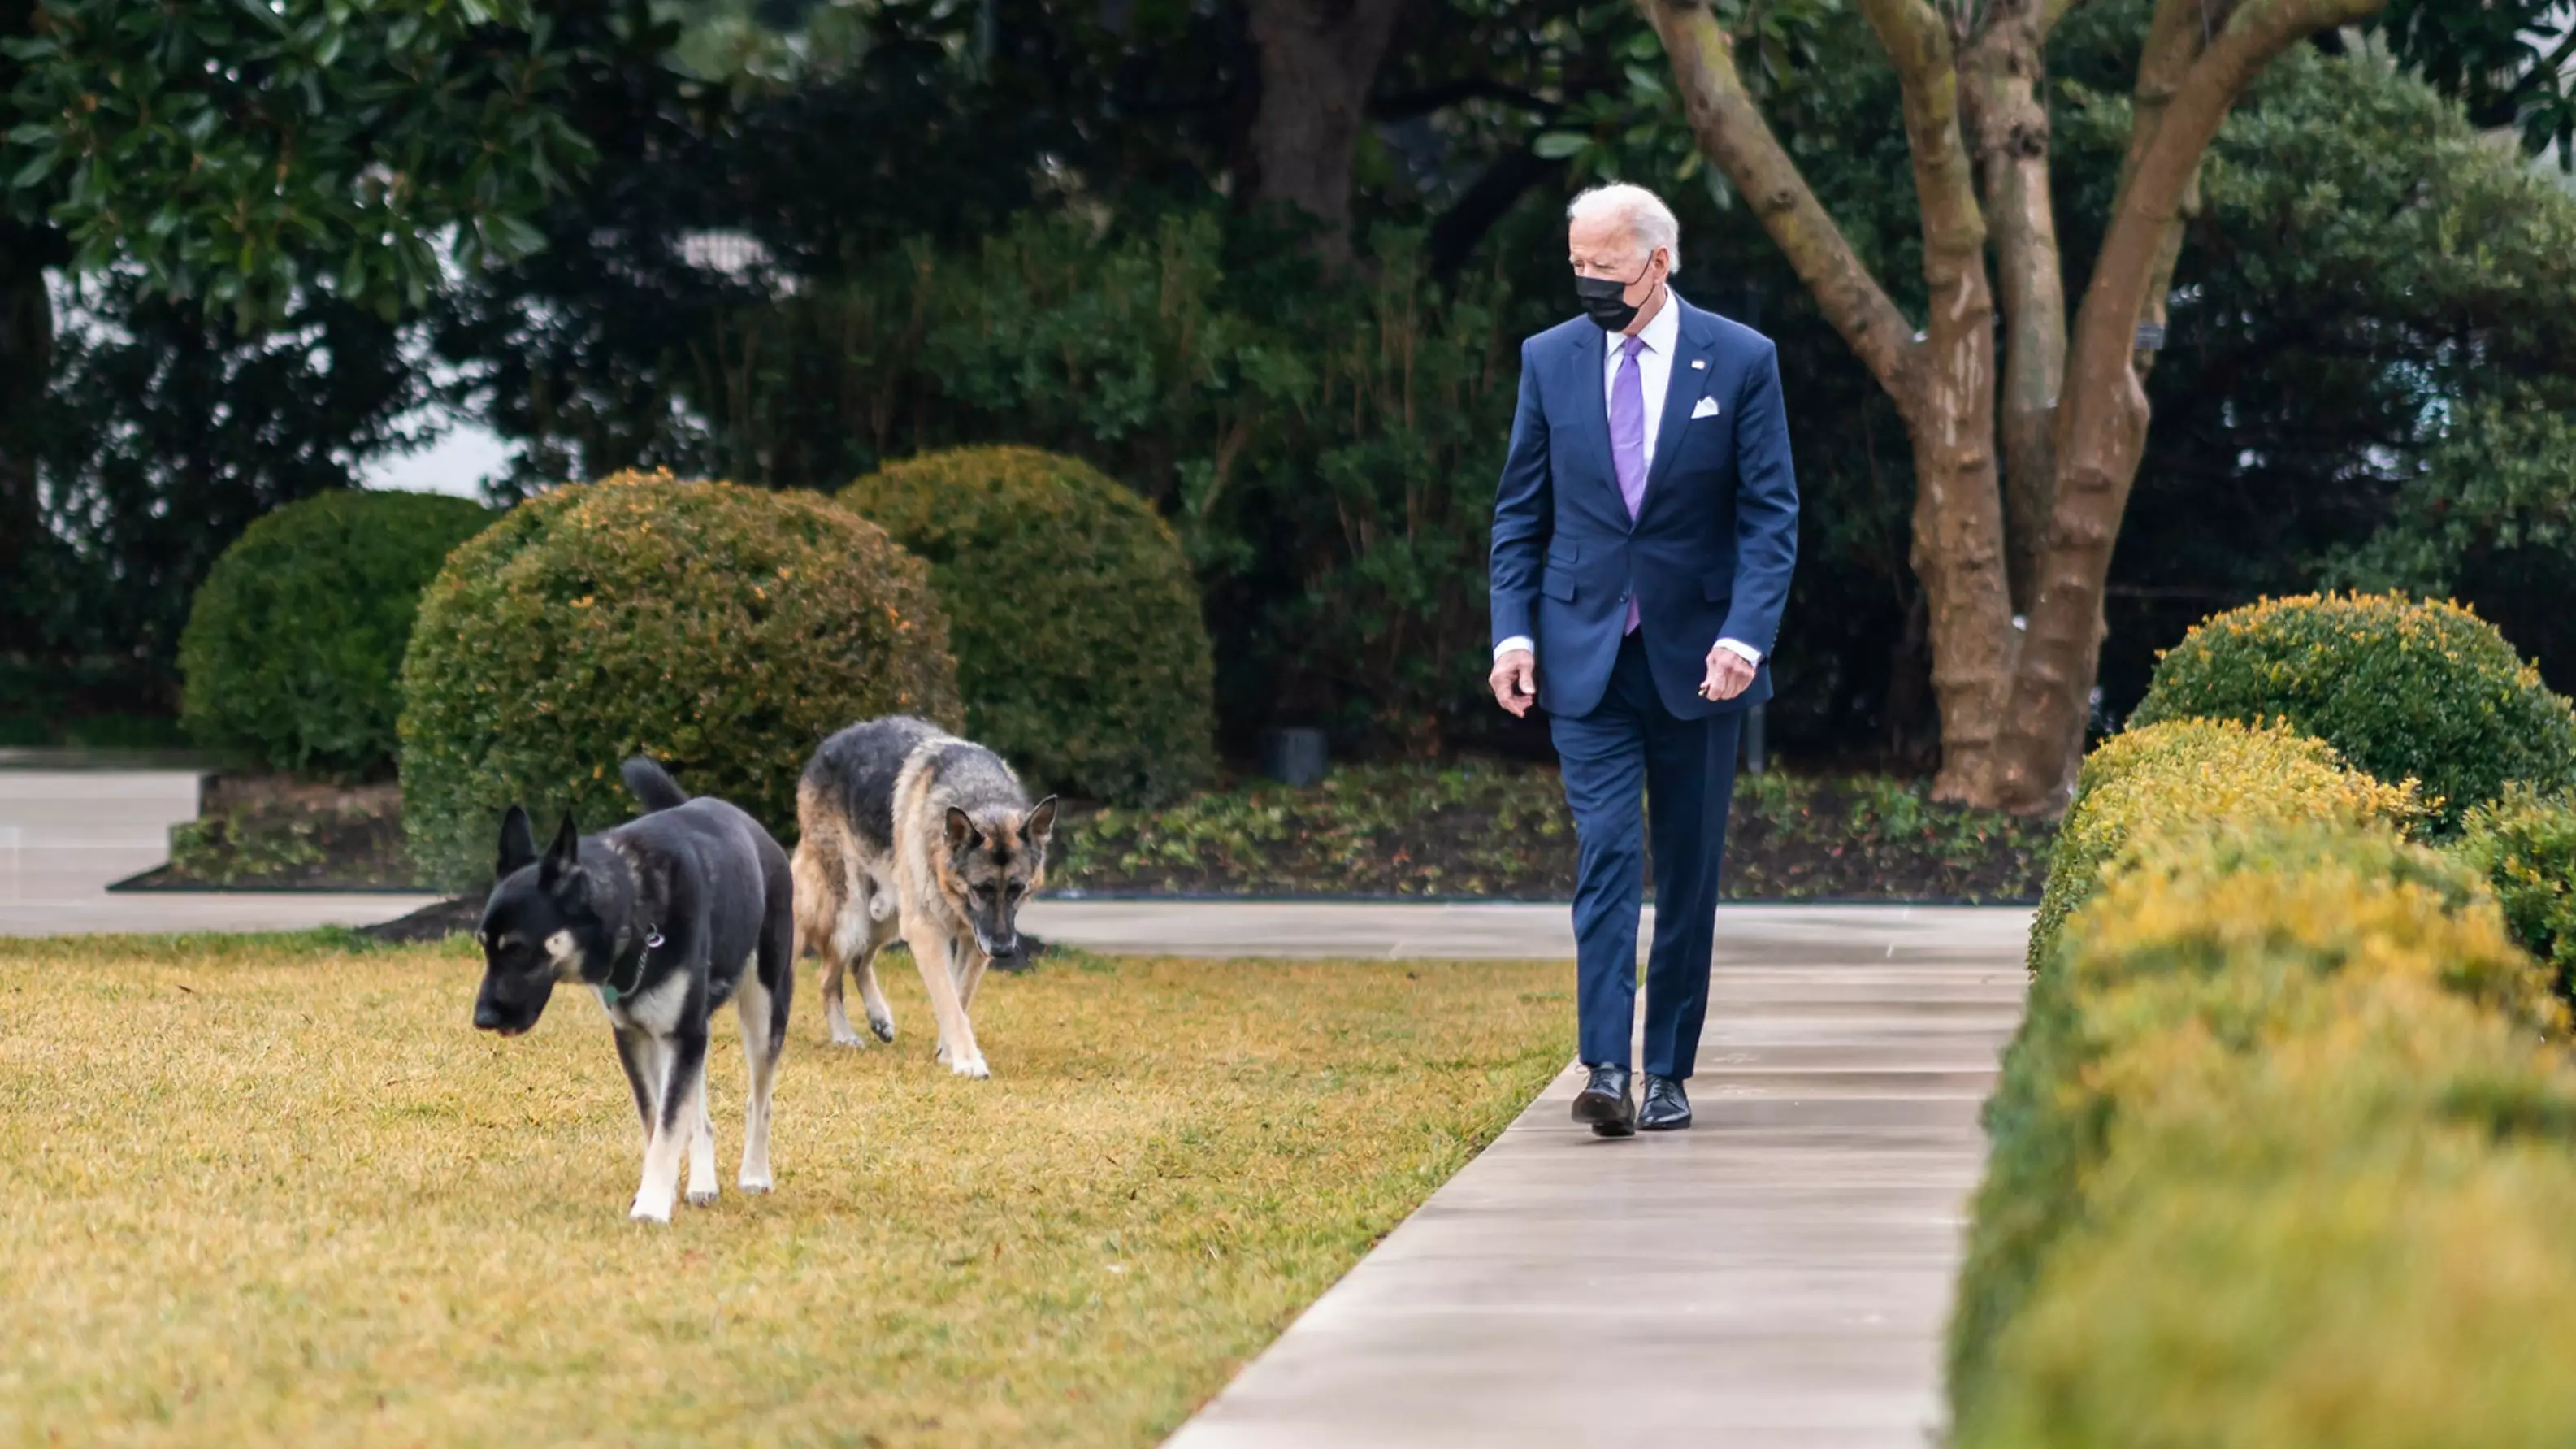 News Channel Accuses President Joe Biden's Dog Of Not Being 'Presidential' 